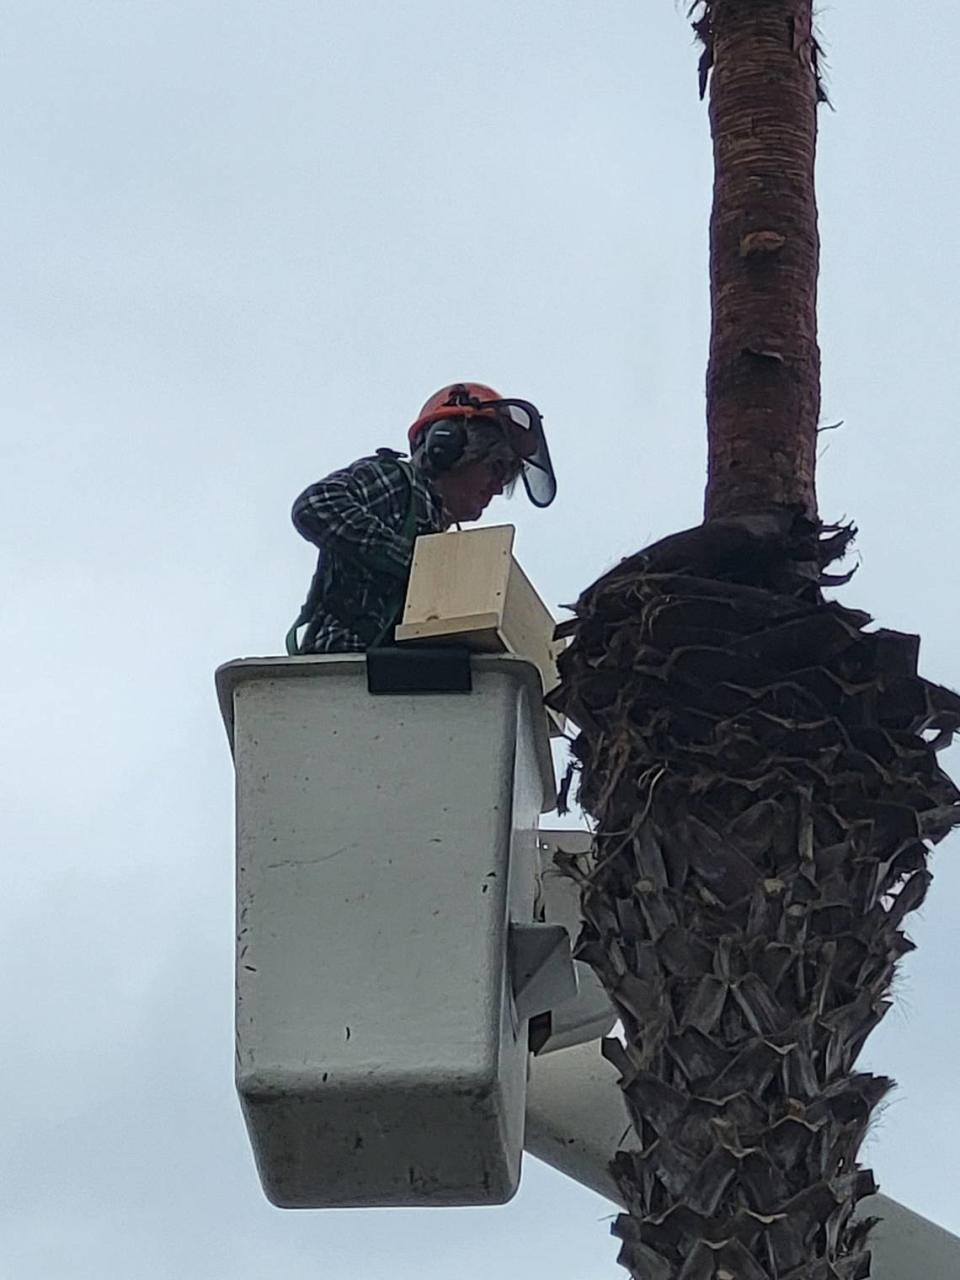 Sean Ellis from Coastal Tree Experts installs a bird house for a pair of kestrels on a palm tree in Morro Bay in March 2024.